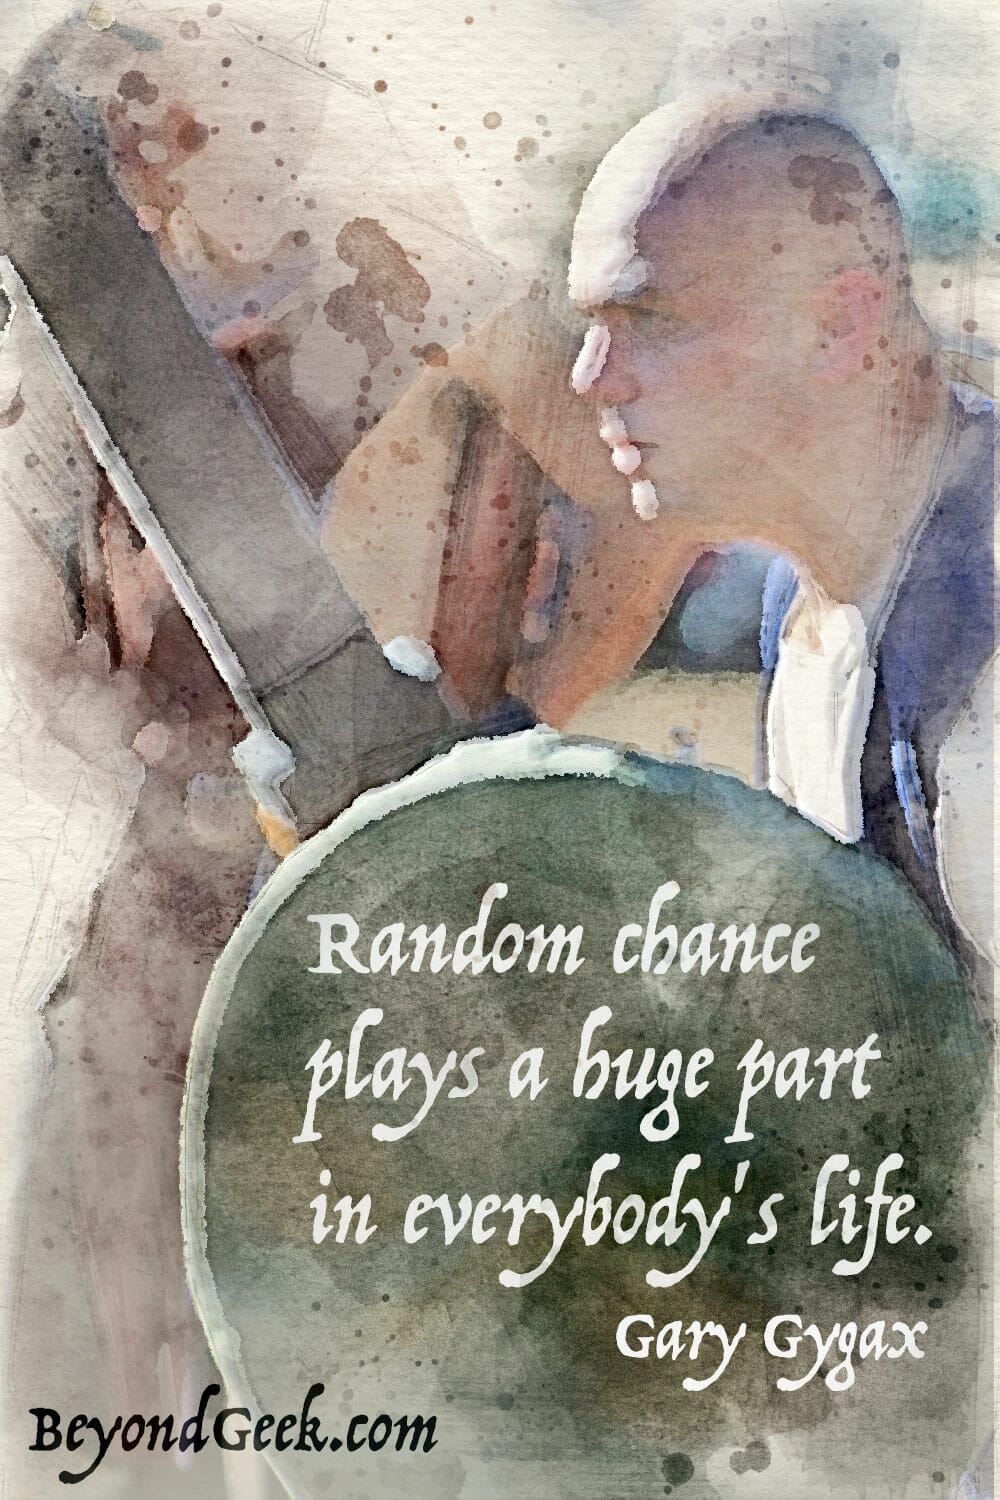 Random chance plays a big part in everyone's life.